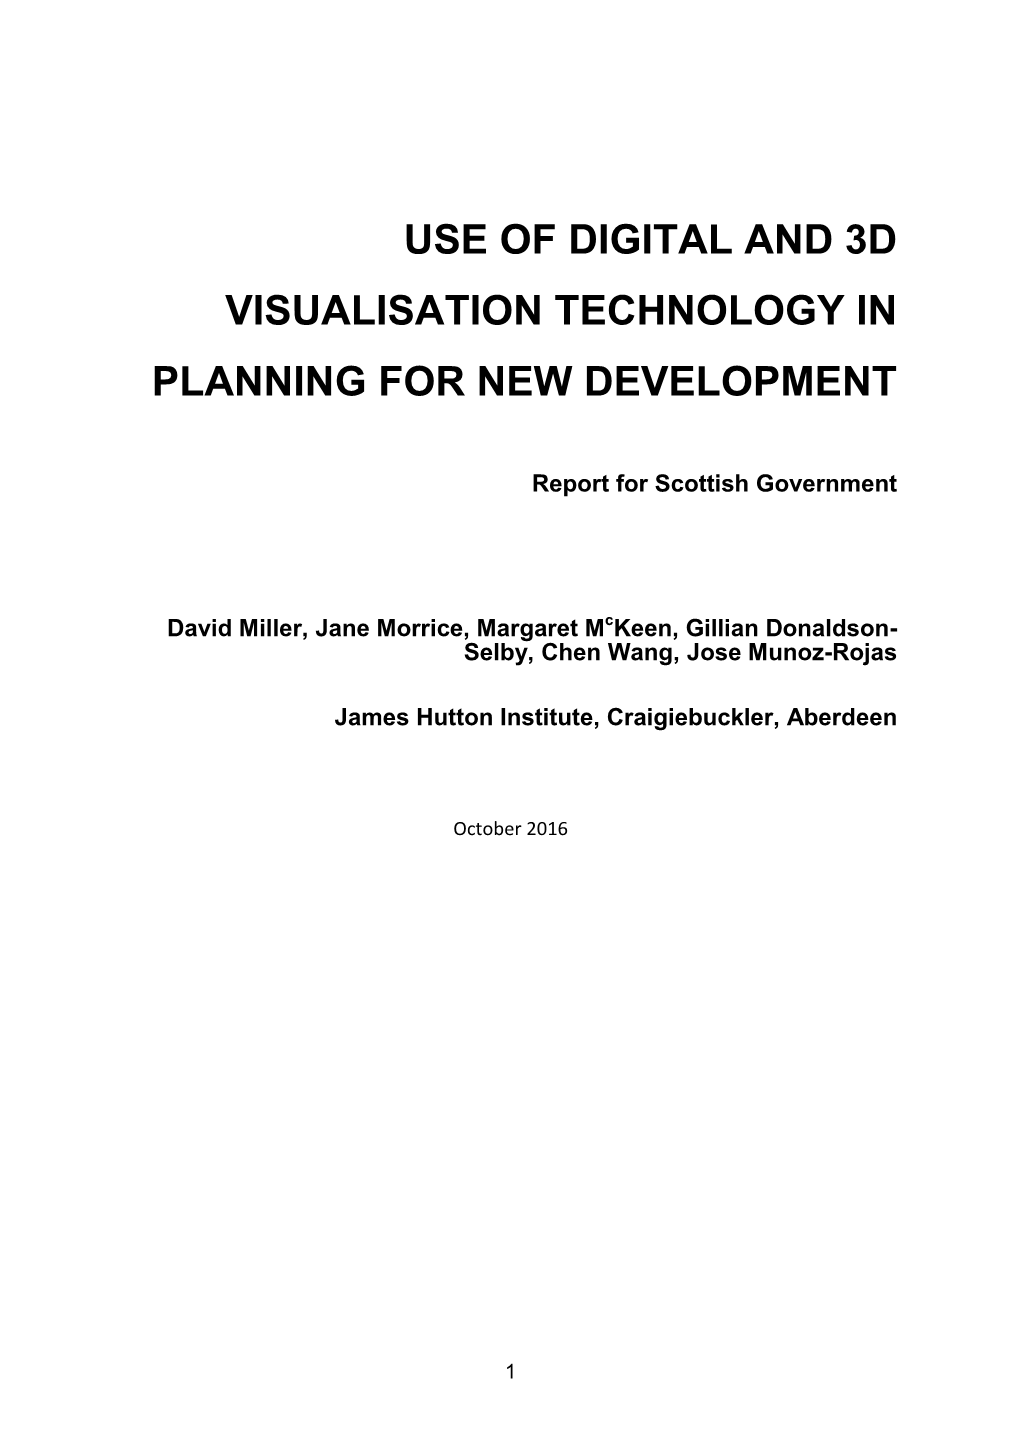 Use of Digital and 3D Visualisation Technology in Planning for New Development